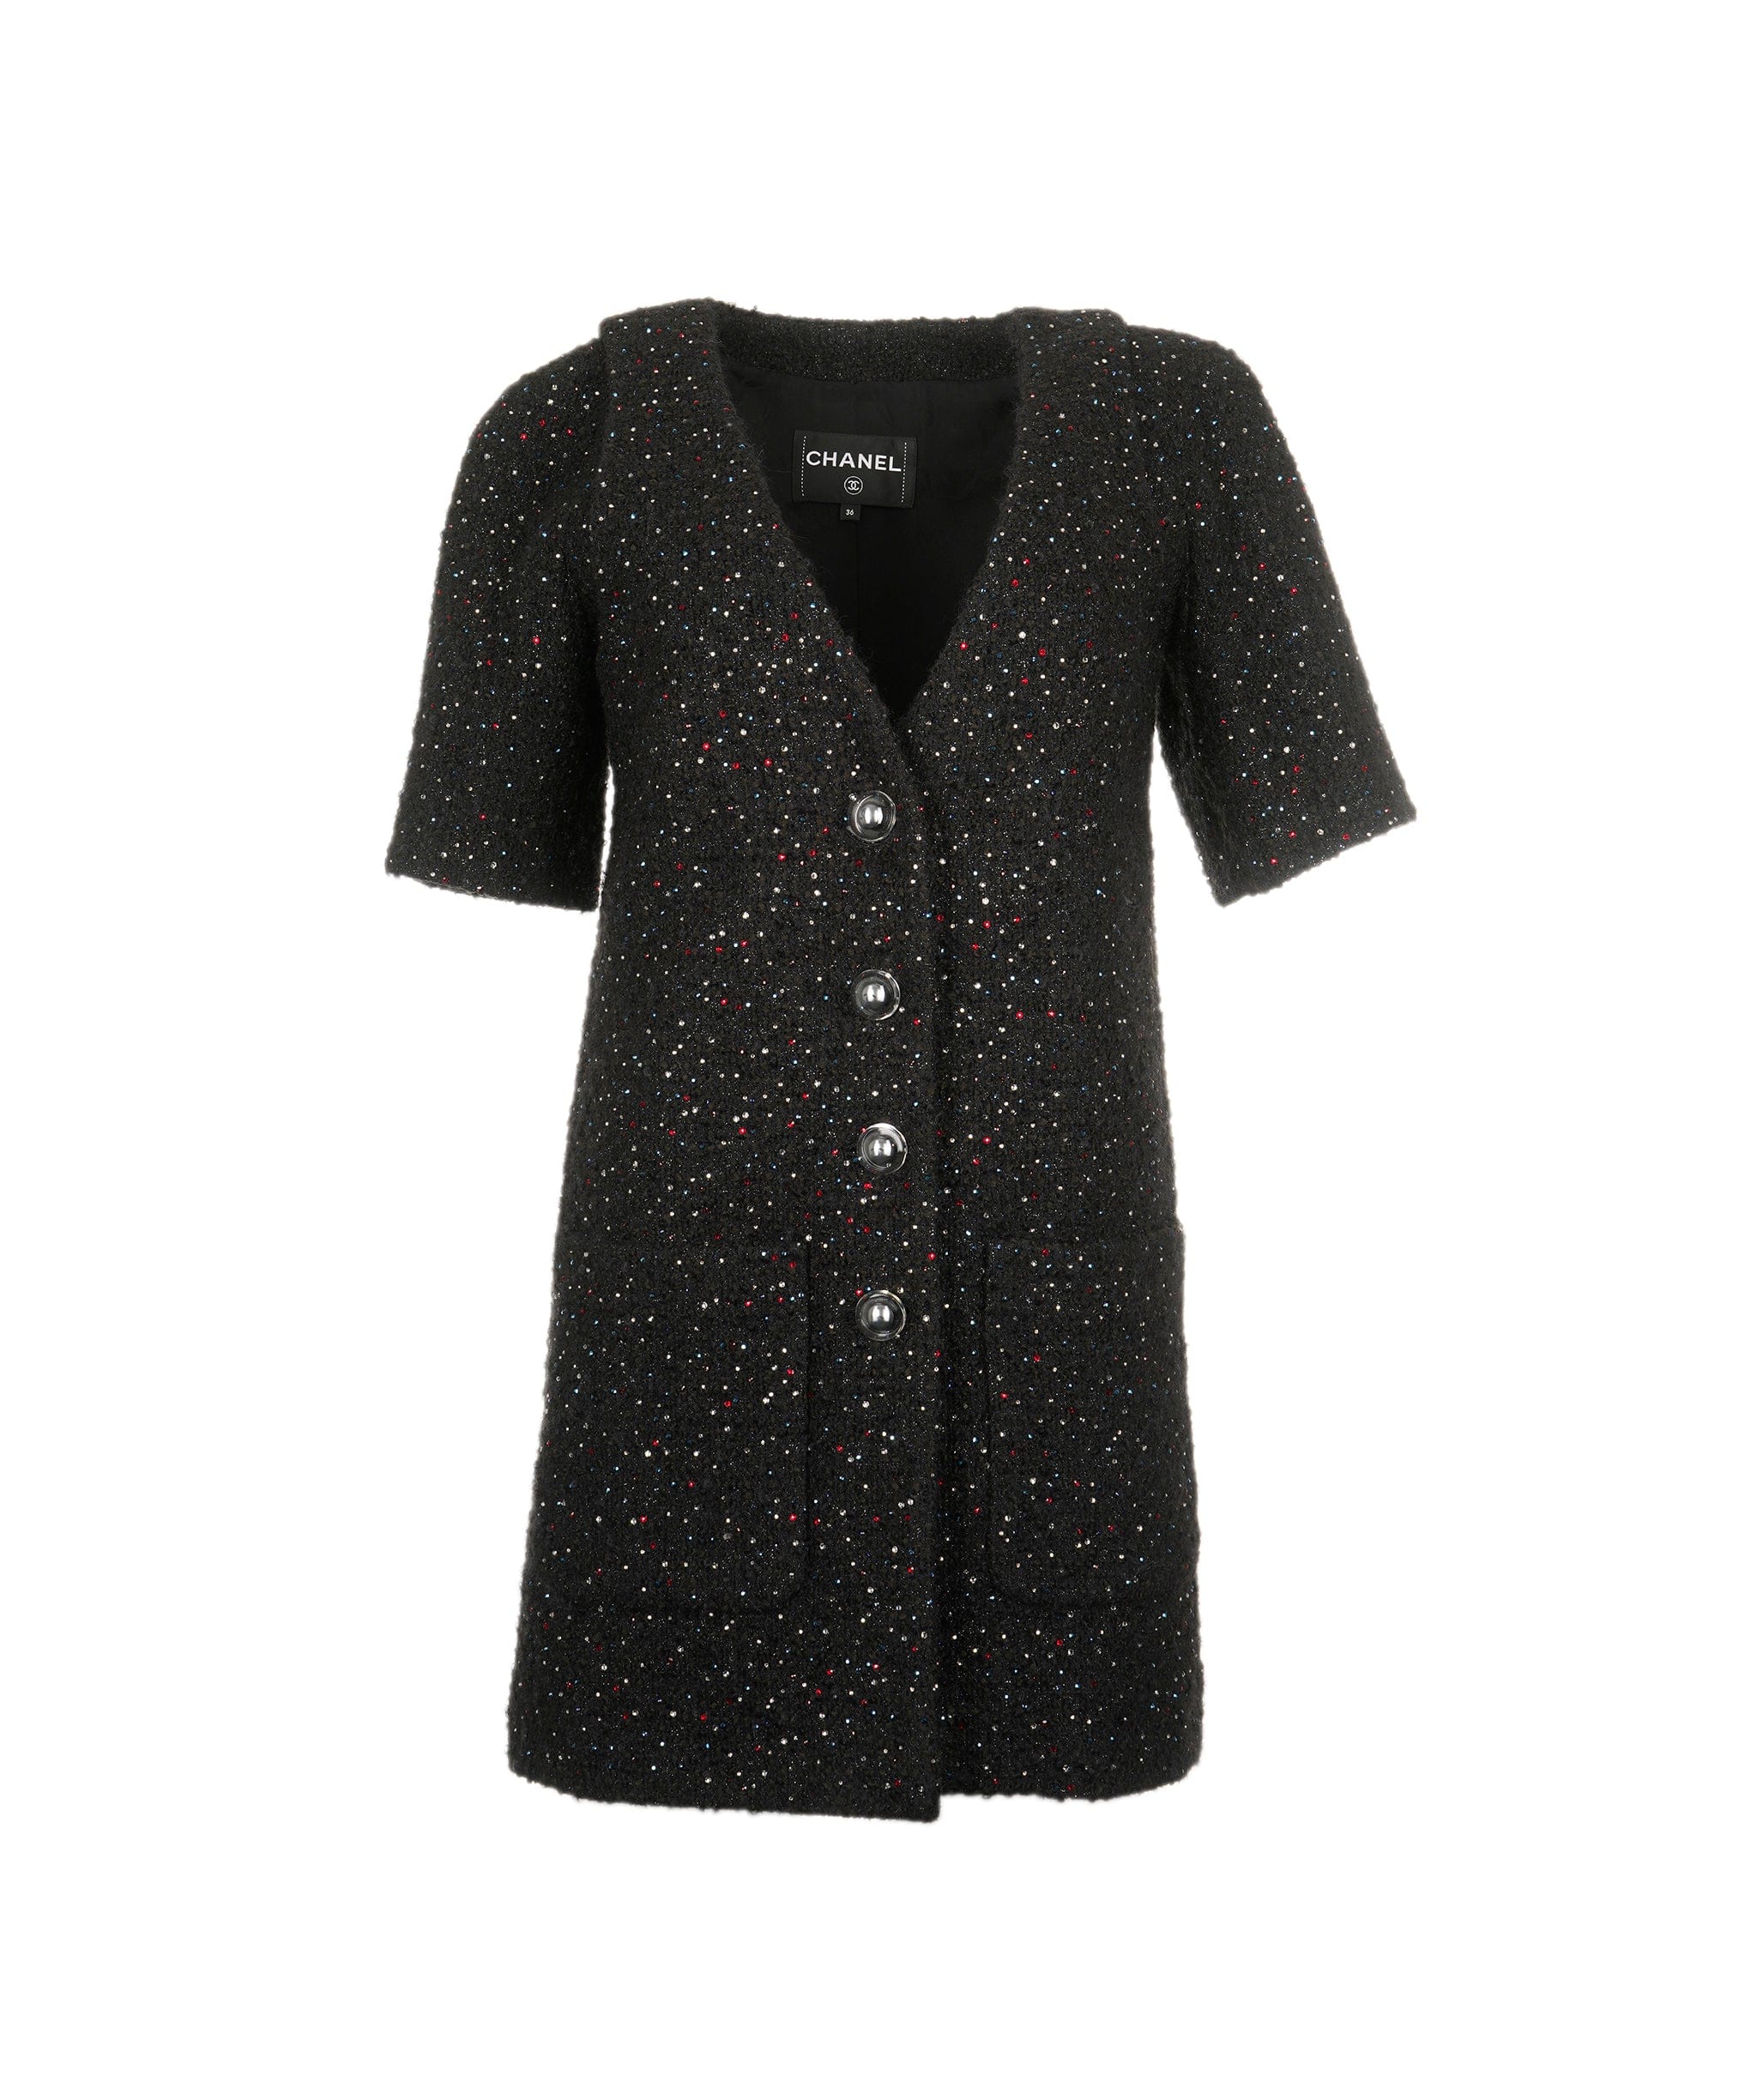 Chanel Chanel Set Dress with matching shorts black tweed and cristals AVC1259